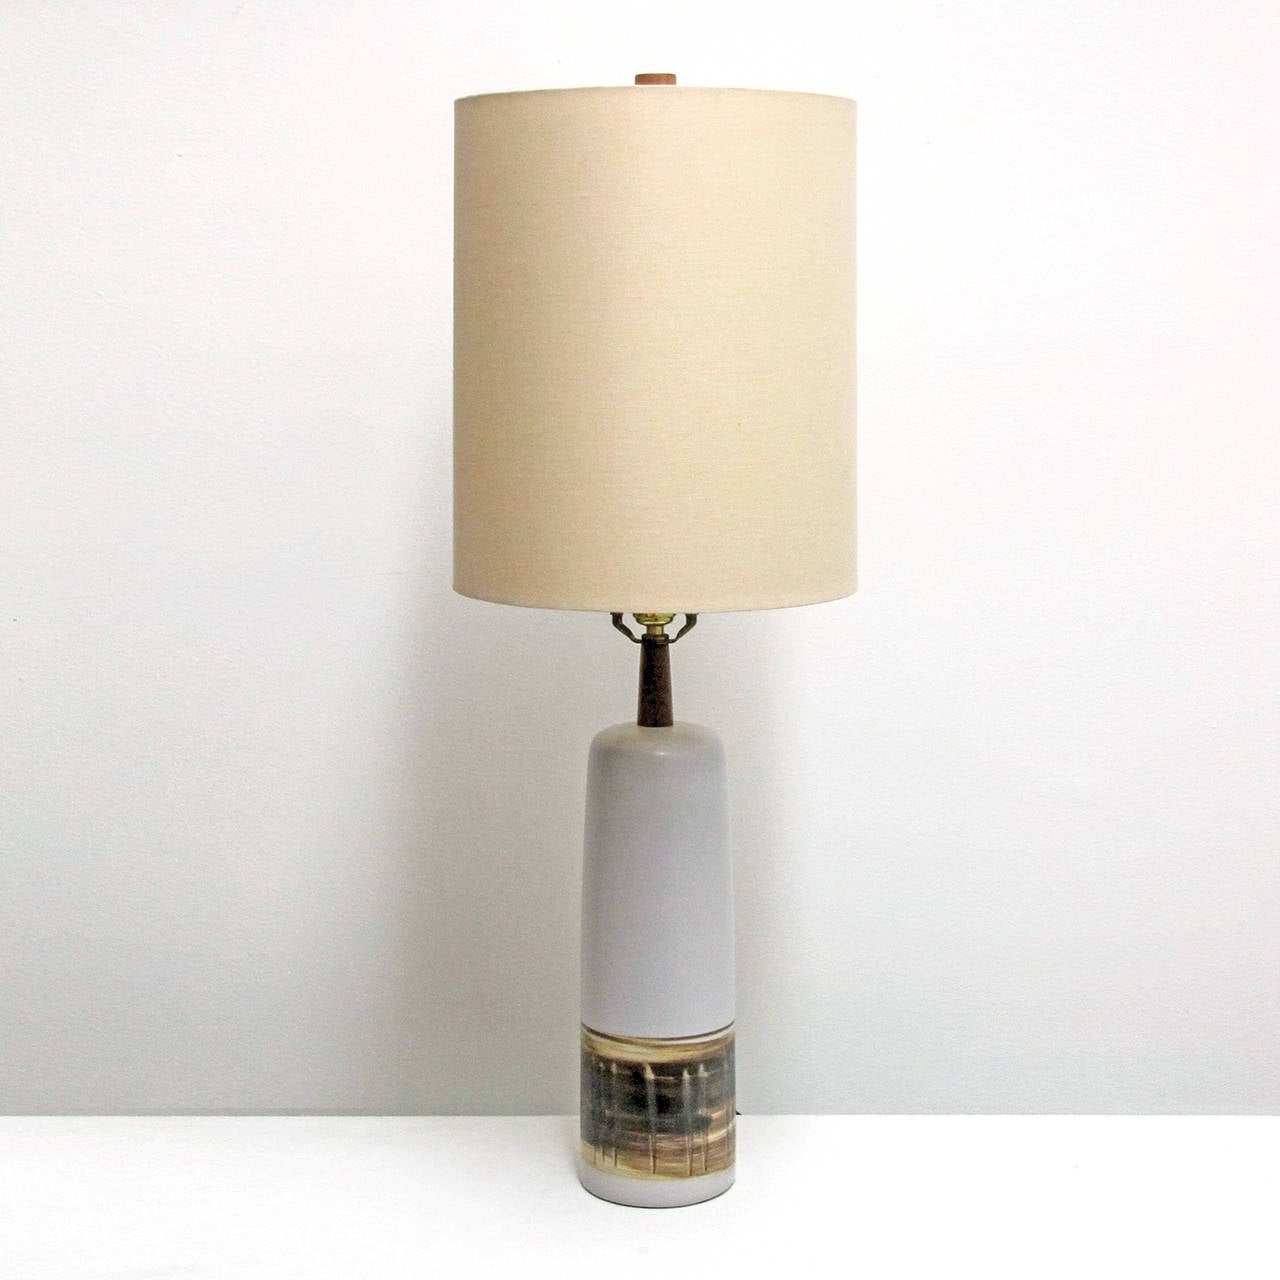 Large-scale soft gray and white satin finish ceramic table lamp by Marshall Studios, broad textured band along the lower third, Gordon Martz's signature details of walnut necks and finial, signed.